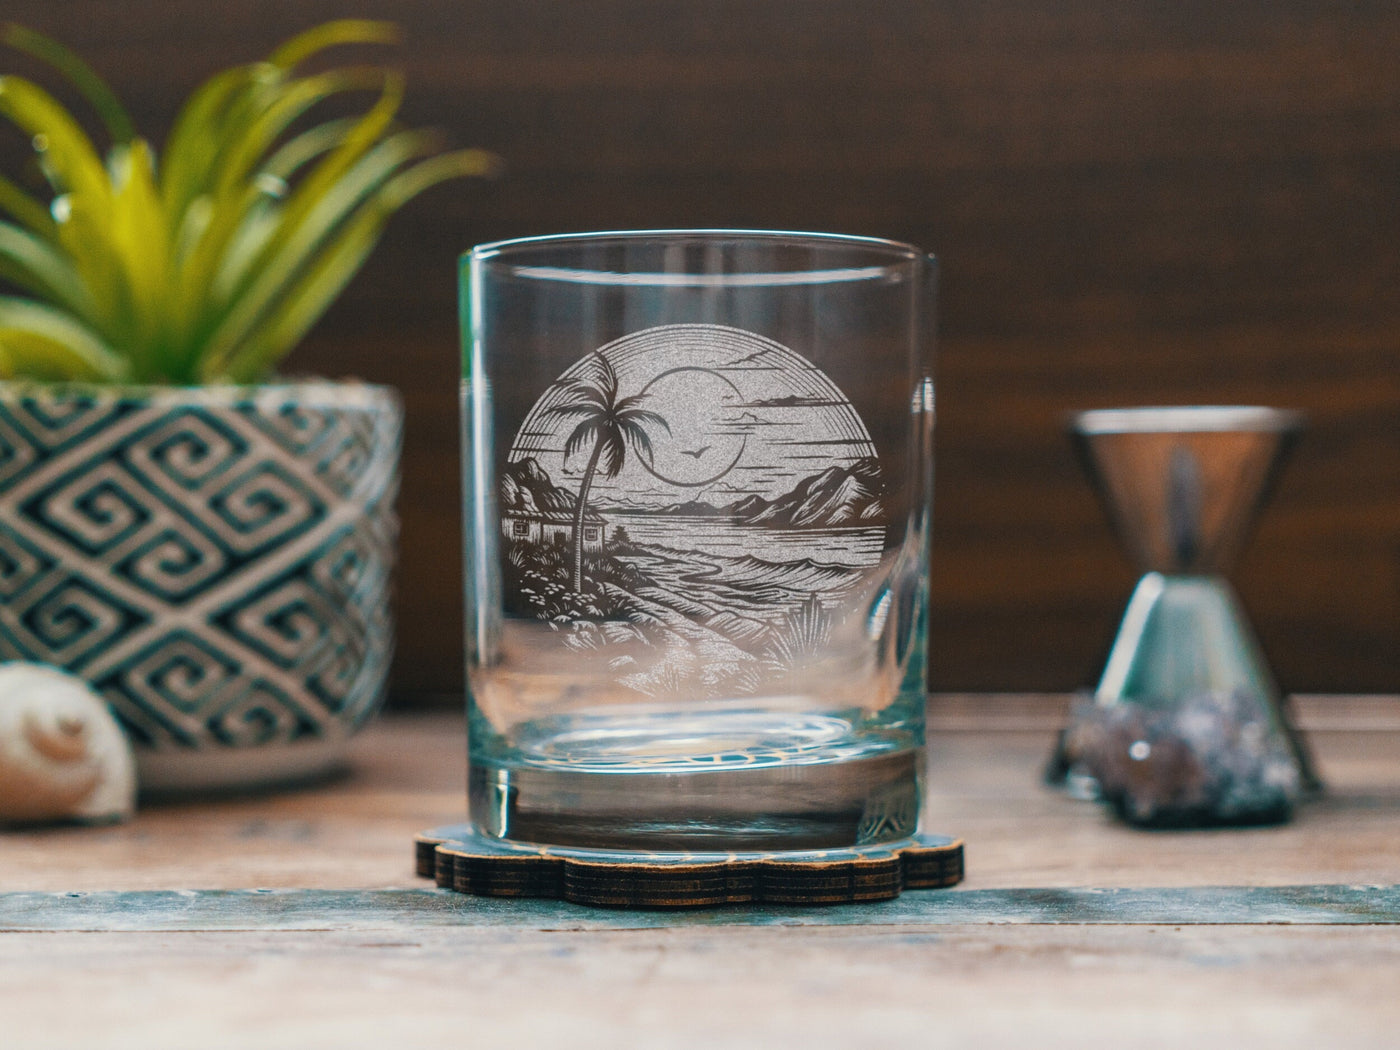 Sandy Beach Scene Glasses | Personalized etched beer, whiskey, wine & cocktail glassware. Beach Coast Lifestyle gift, Tropical Summer Vibes.